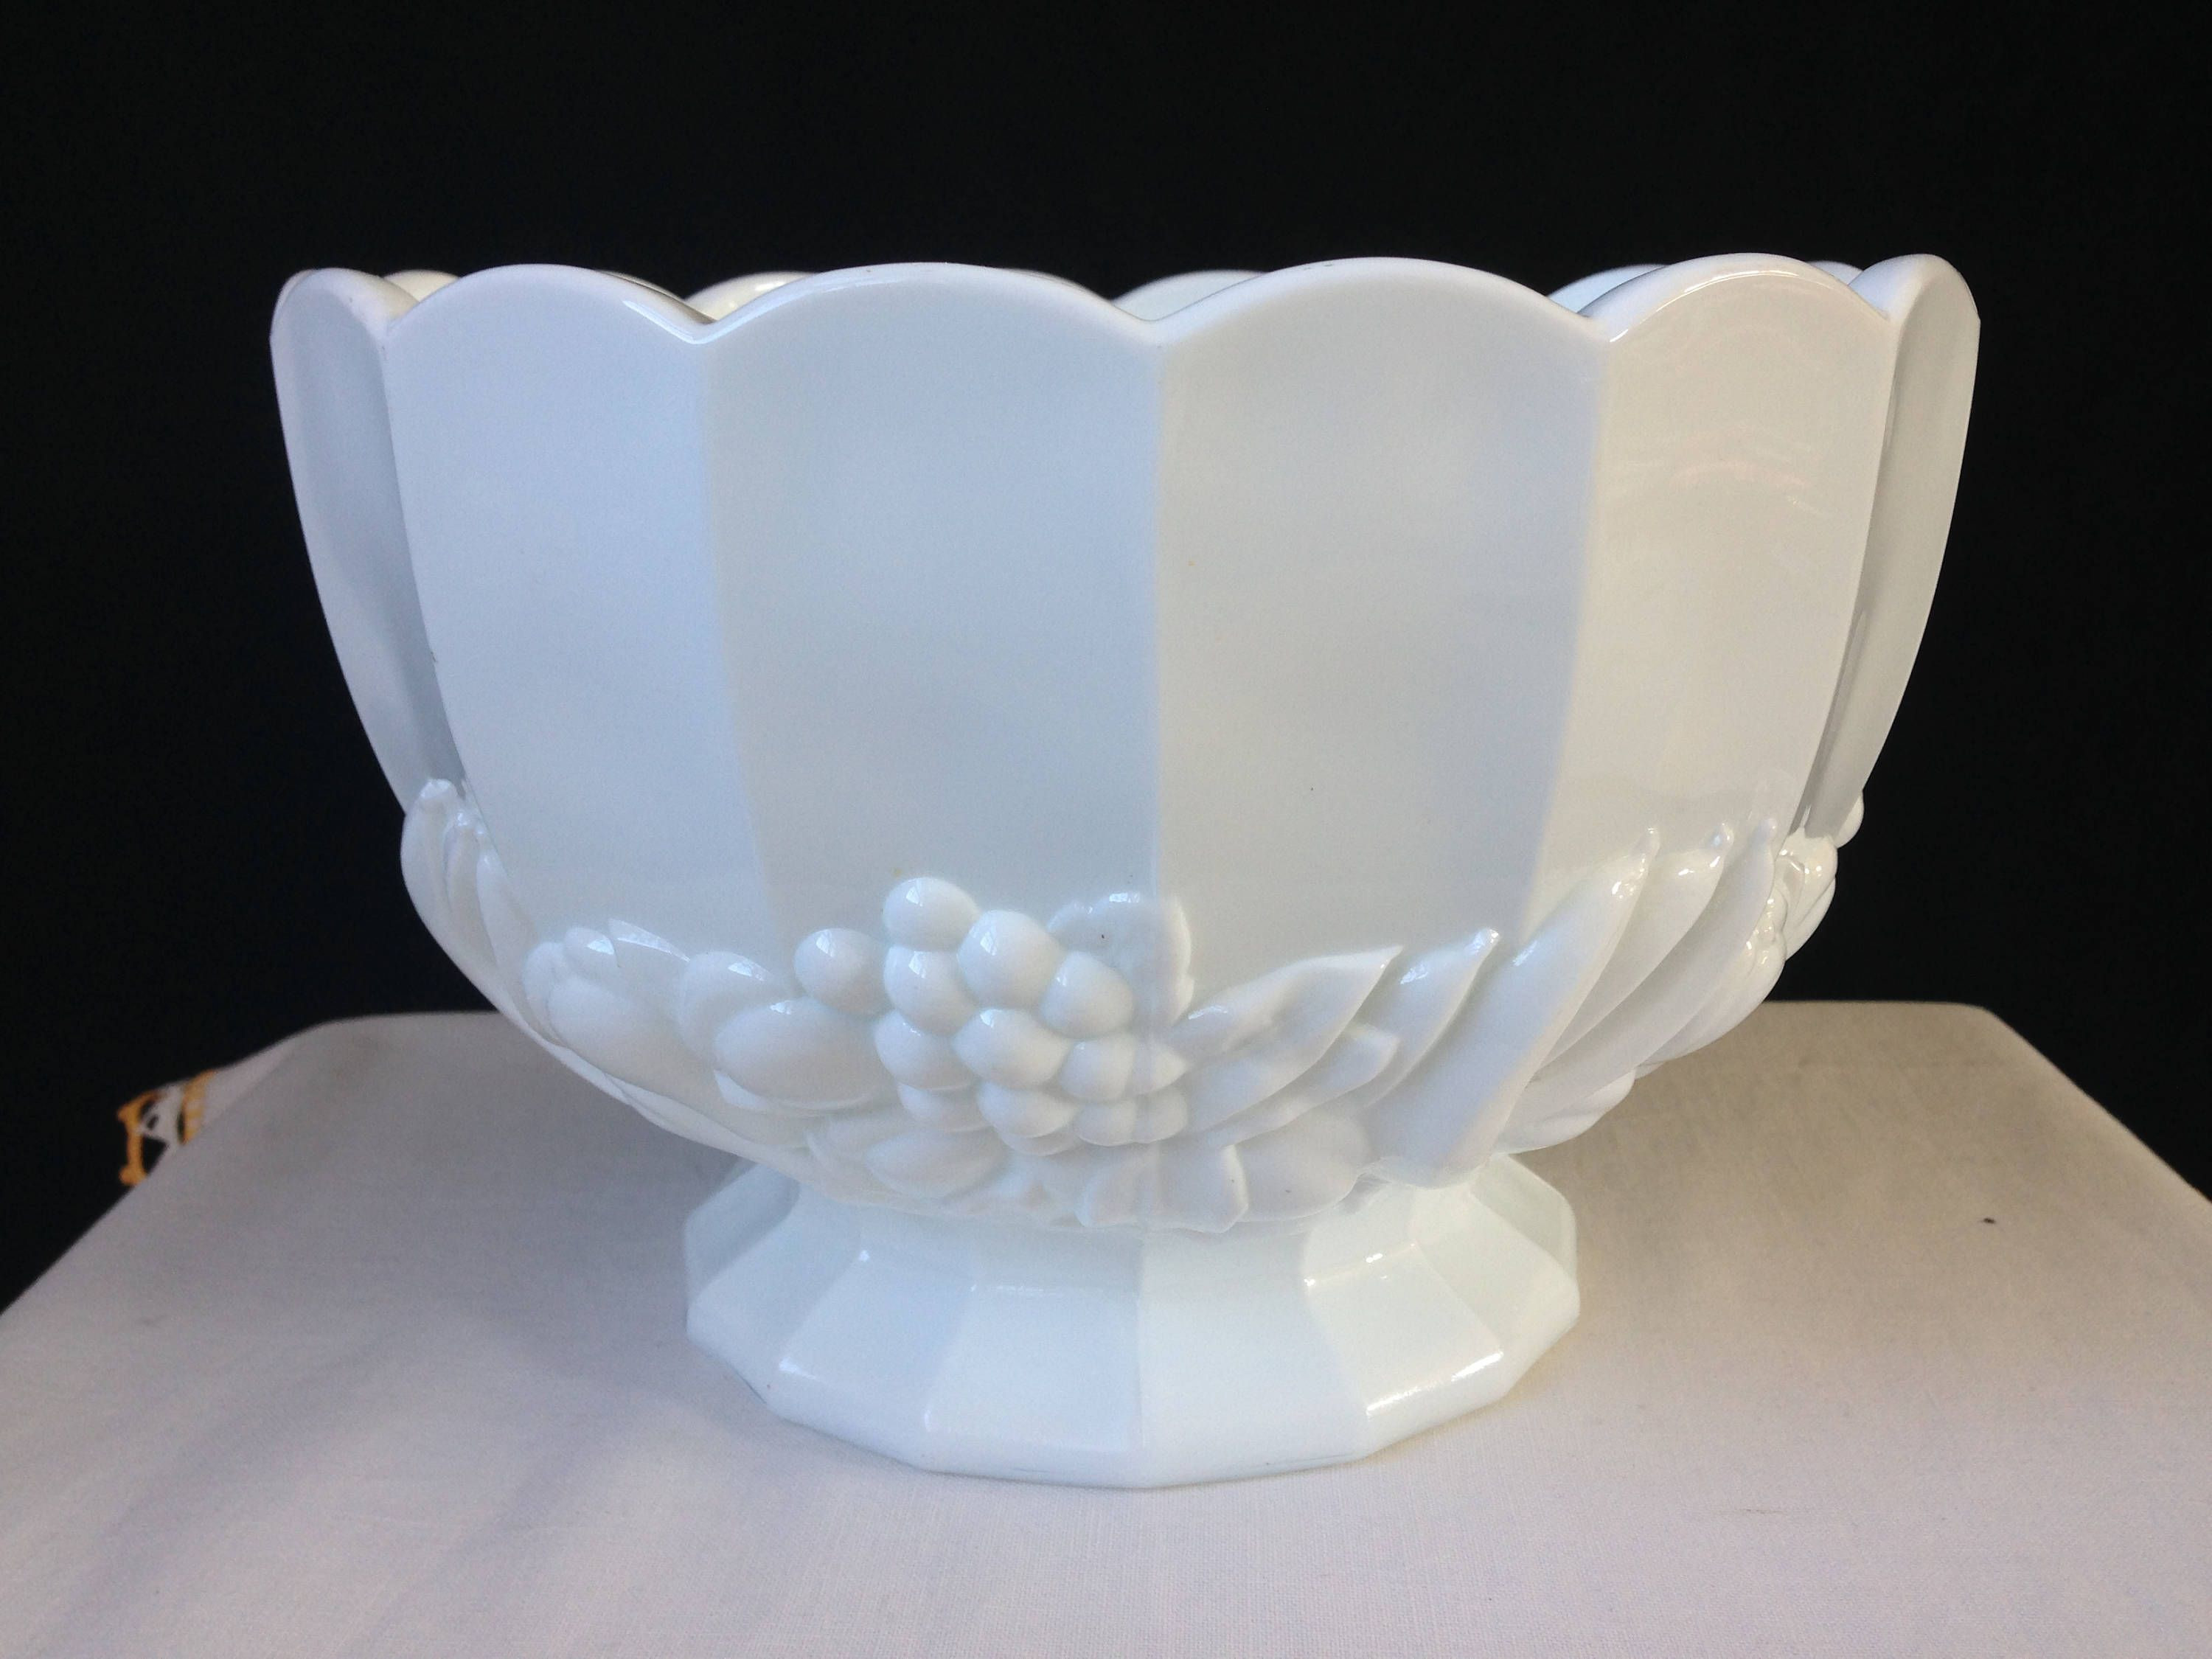 24 Awesome Fruit Vase Centerpiece 2024 free download fruit vase centerpiece of indiana glass della robbia banana fruits milk glass footed throughout indiana glass della robbia banana fruits milk glass footed bowl scalloped rim